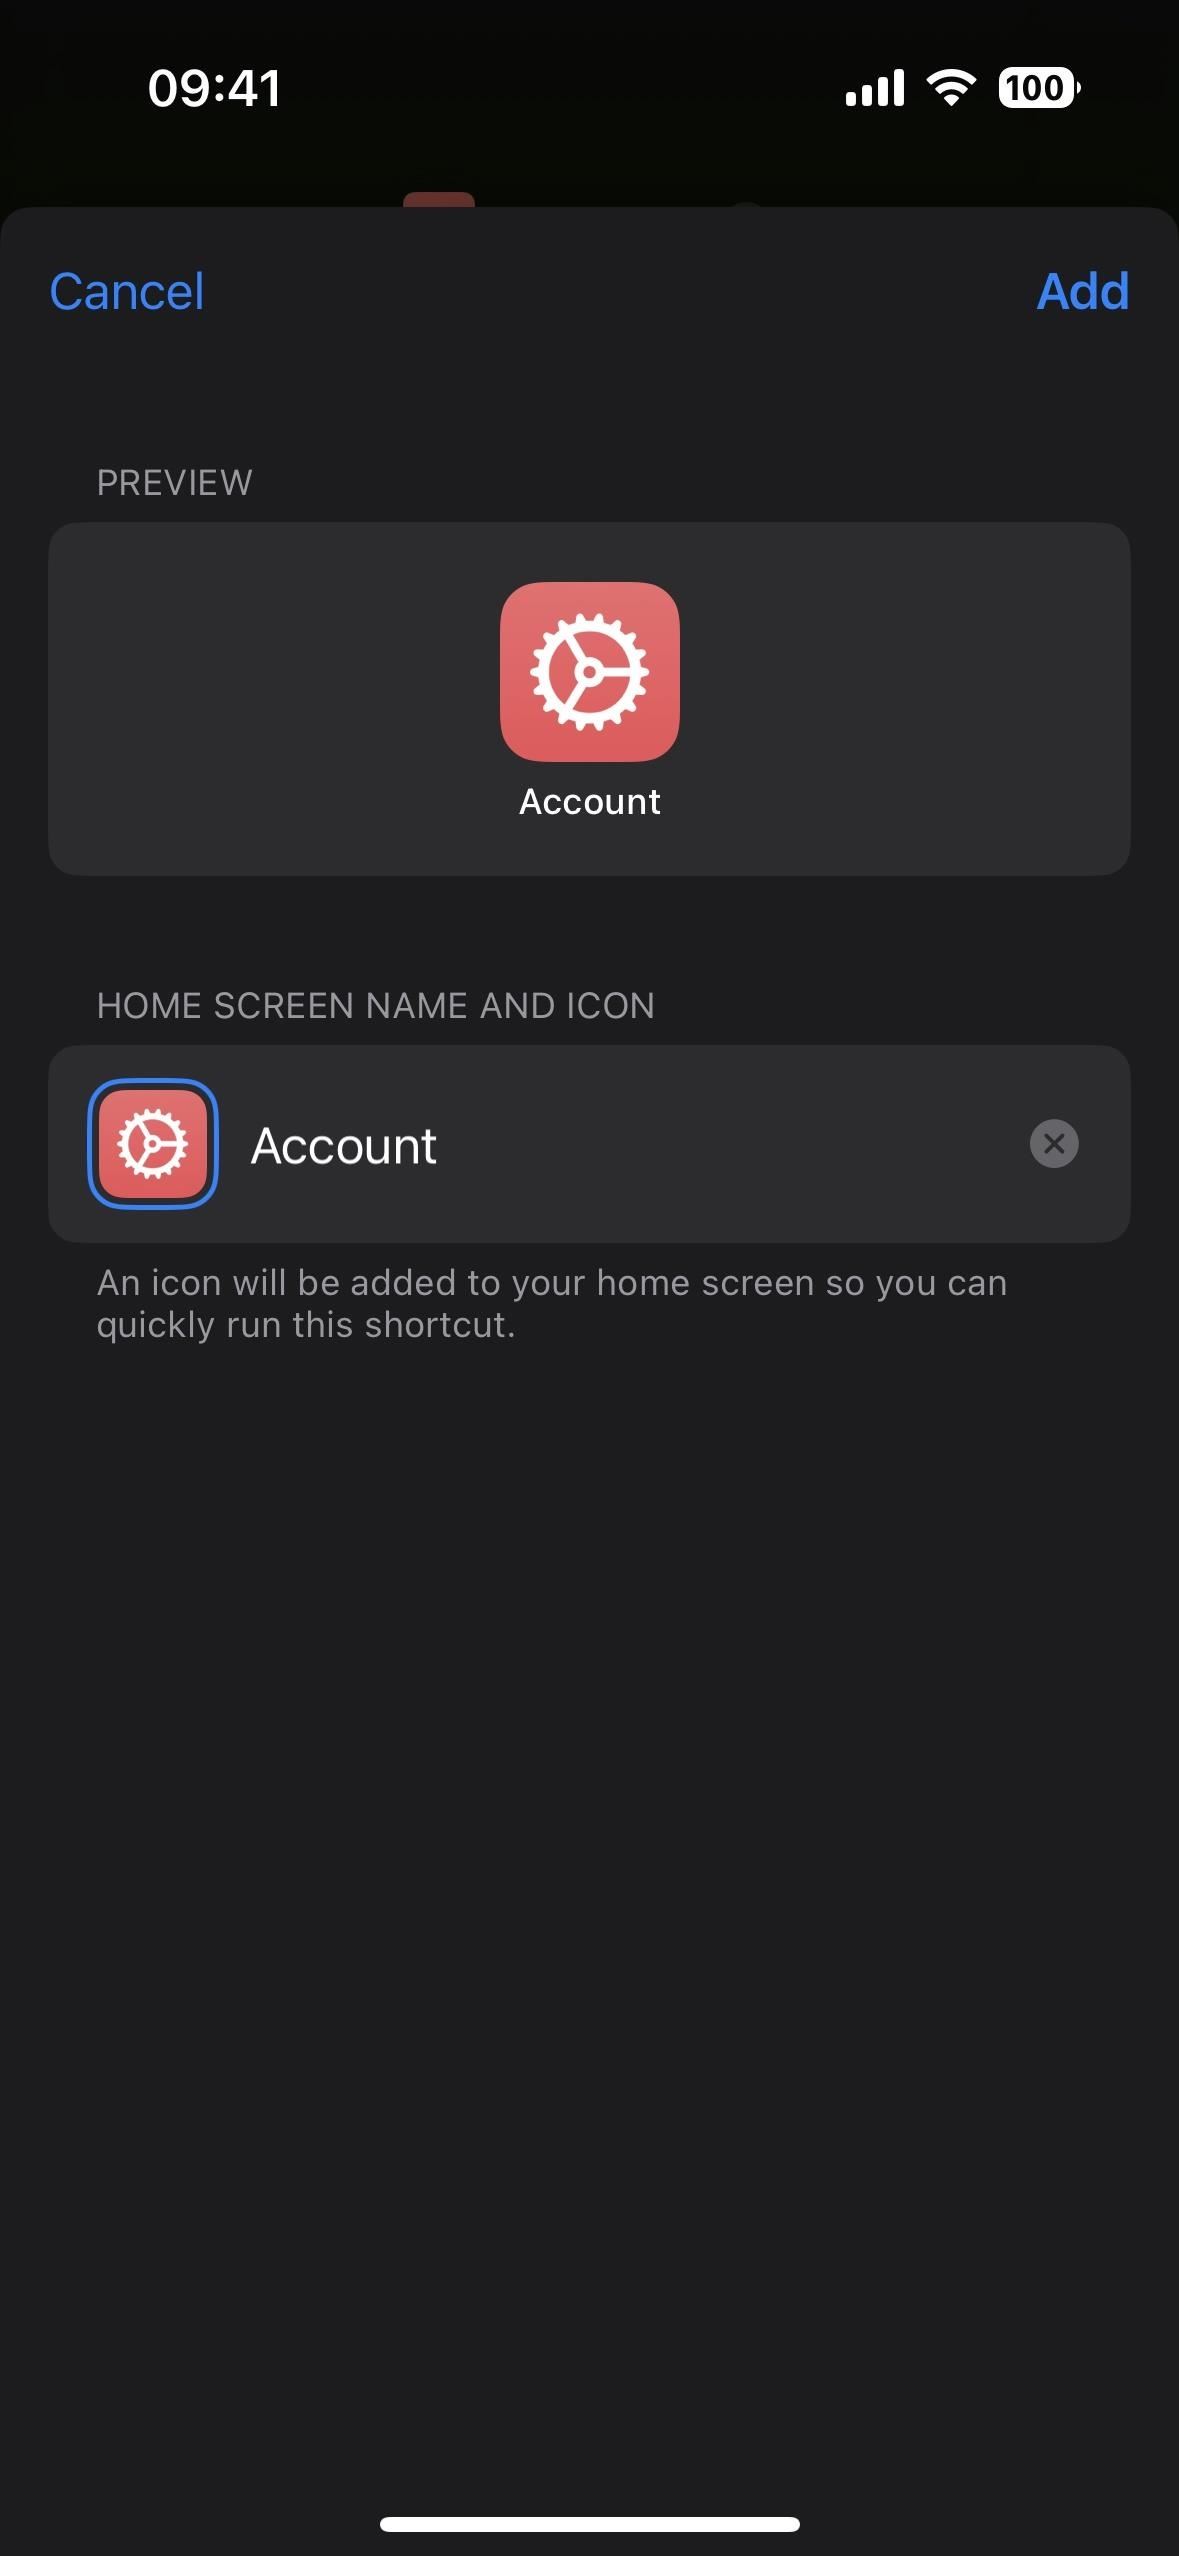 Get Instant Access to Your Account Settings for Media and Purchases on Your iPhone